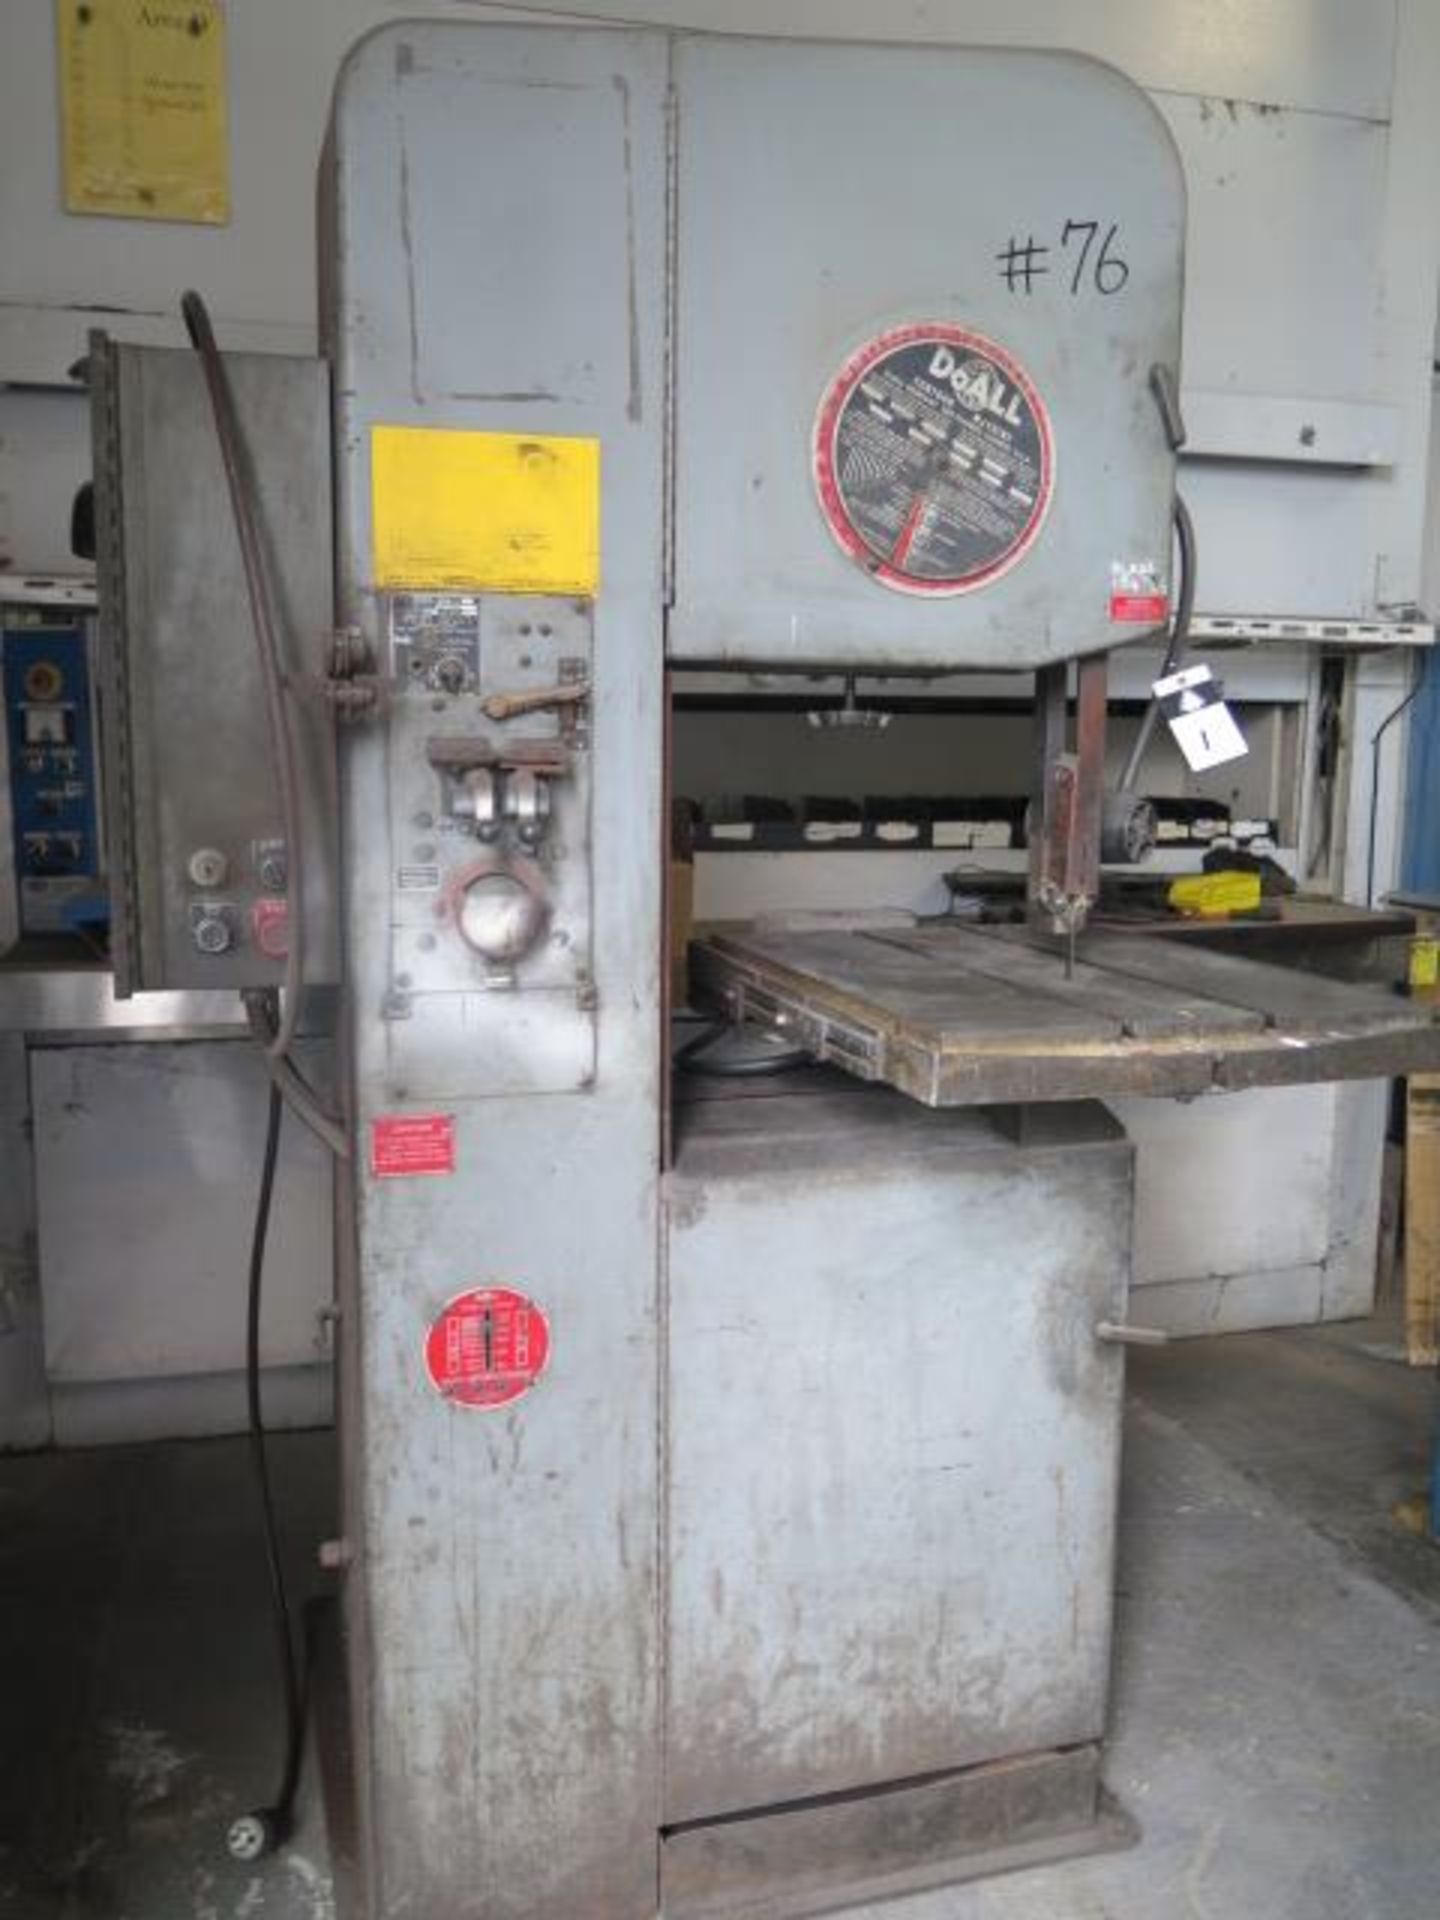 DoAll 2012-1A 20” Vertical Band Saw s/n 340-78413 w/ Blade Welder, 50-5200 FPM, SOLD AS IS